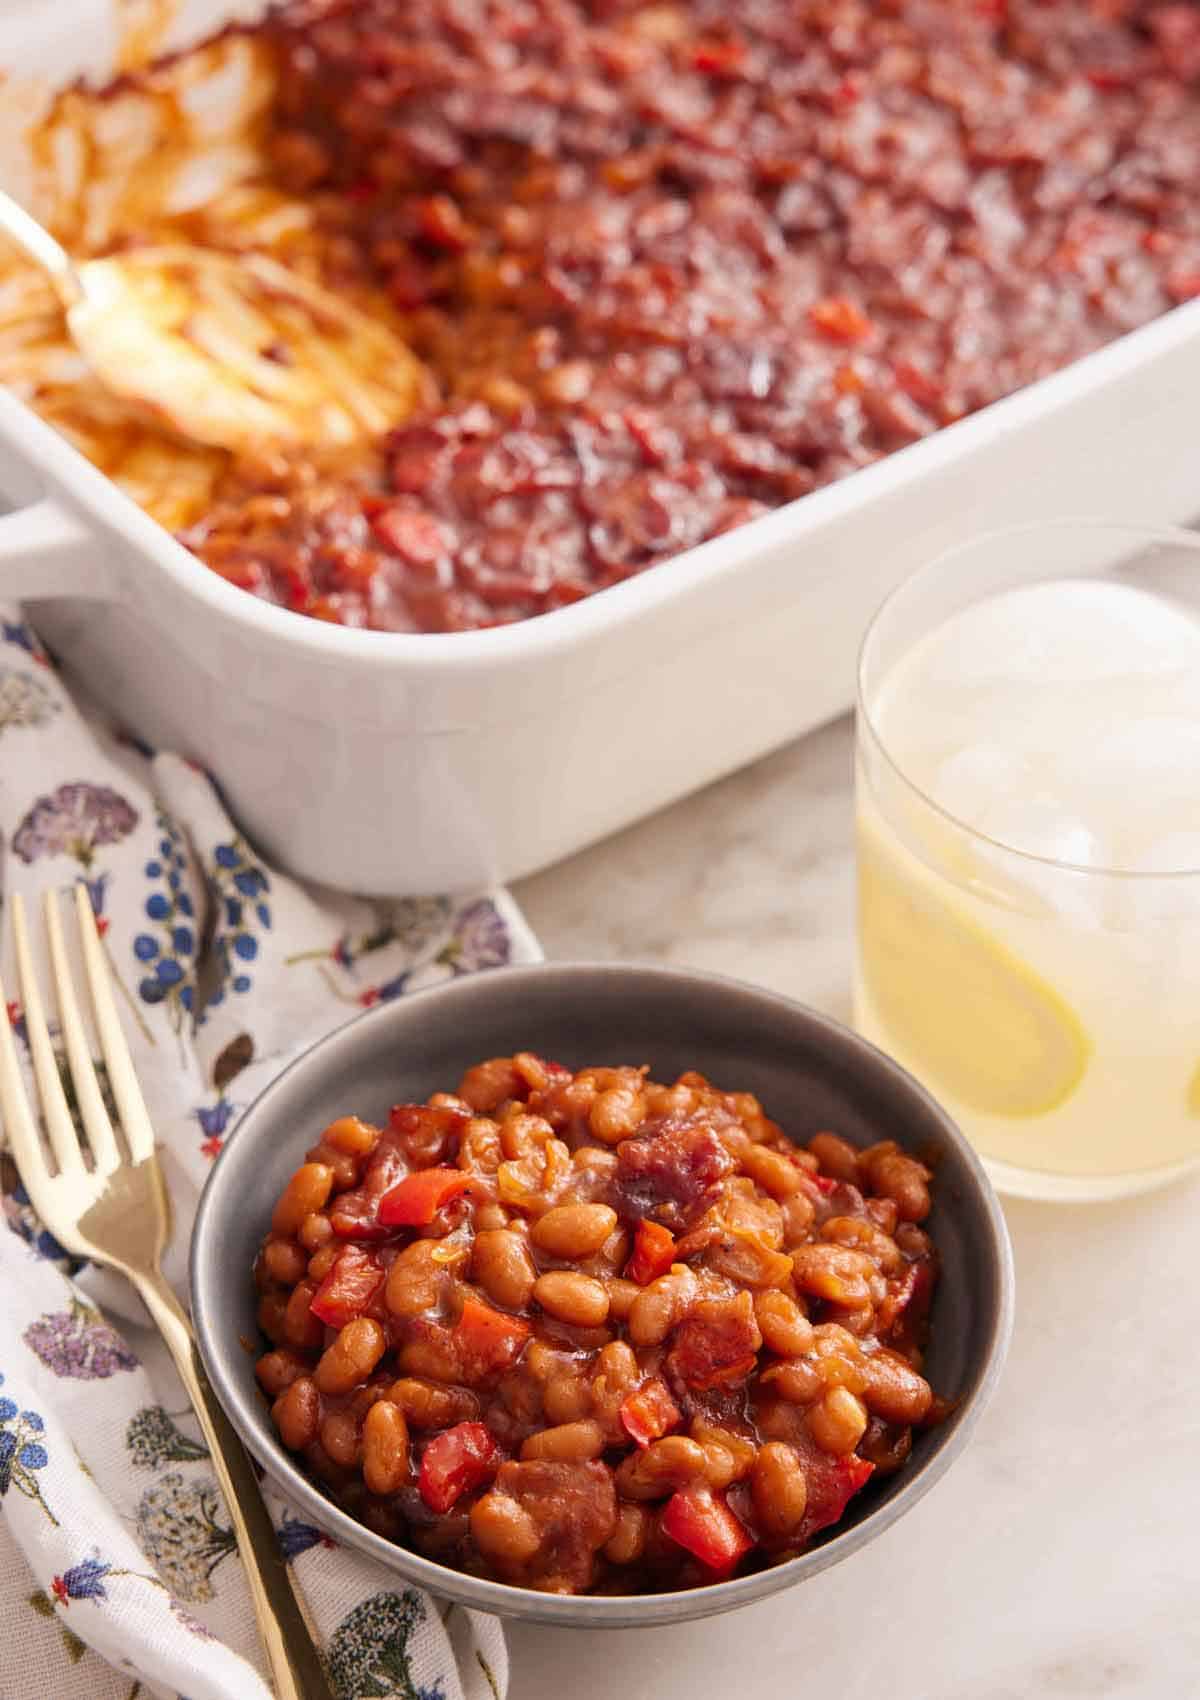 A bowl of baked beans with a glass of lemonade and baking dish of baked beans in the background.